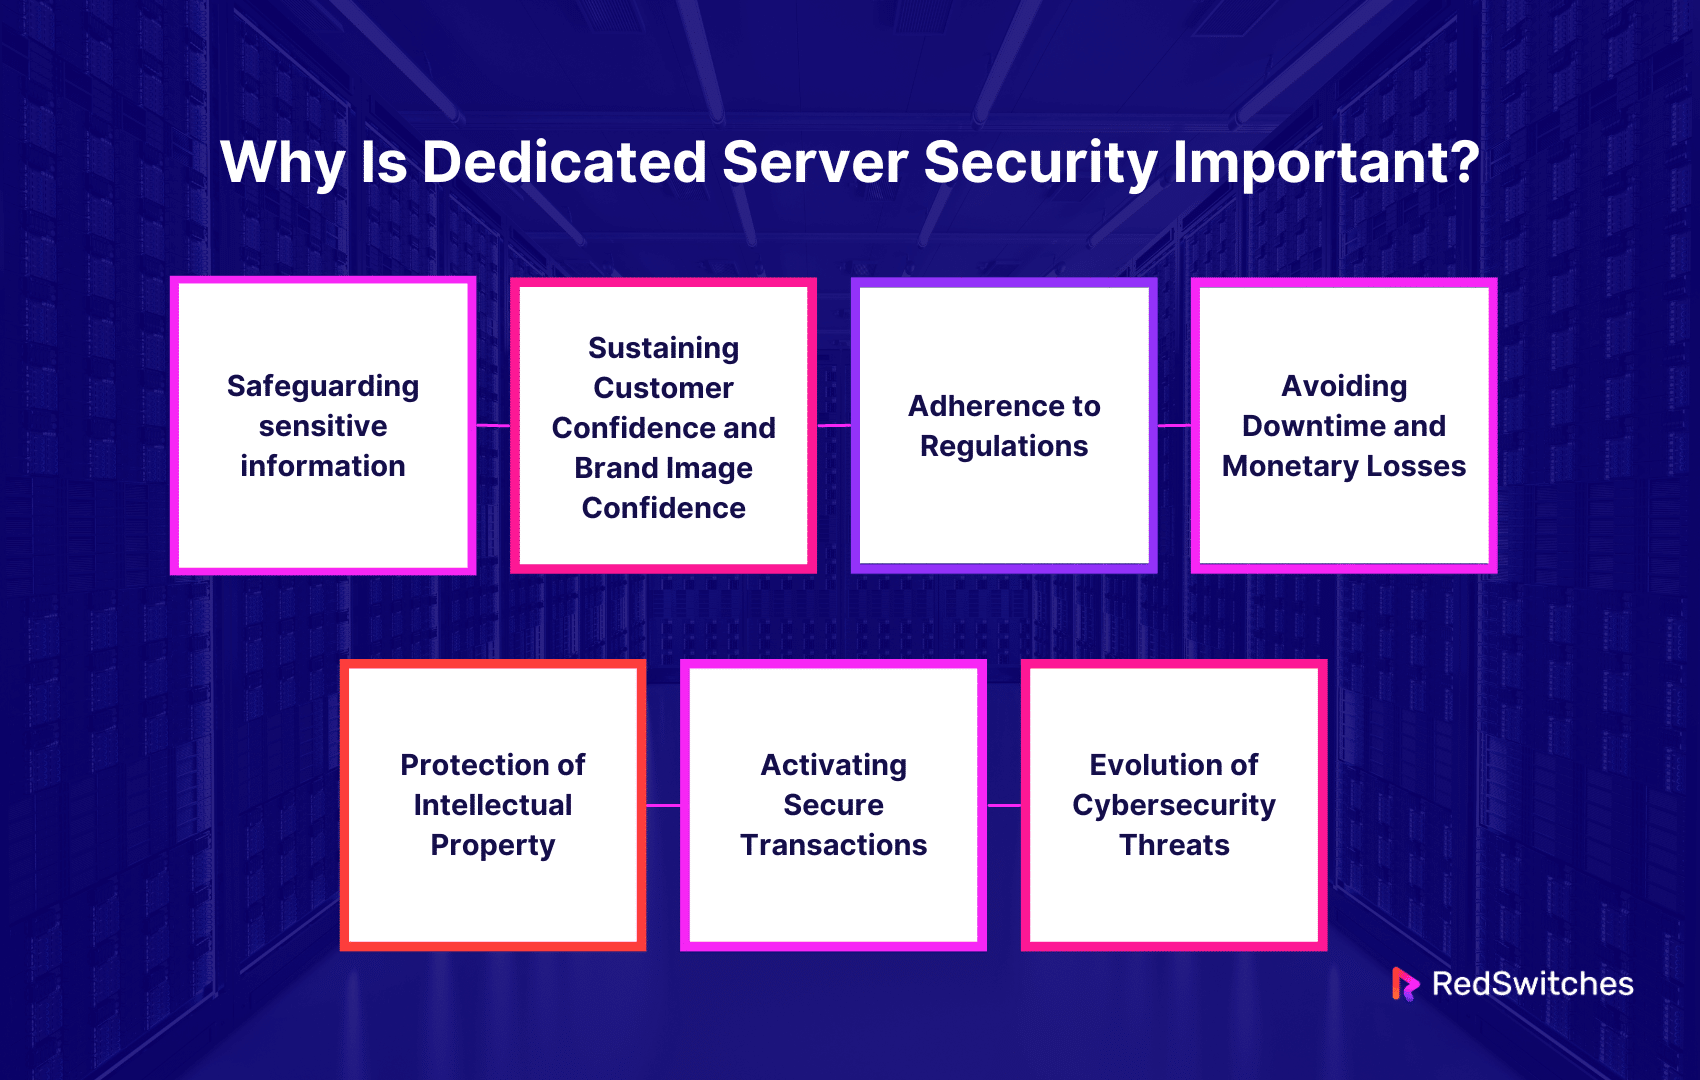 Why Is Server Security Important